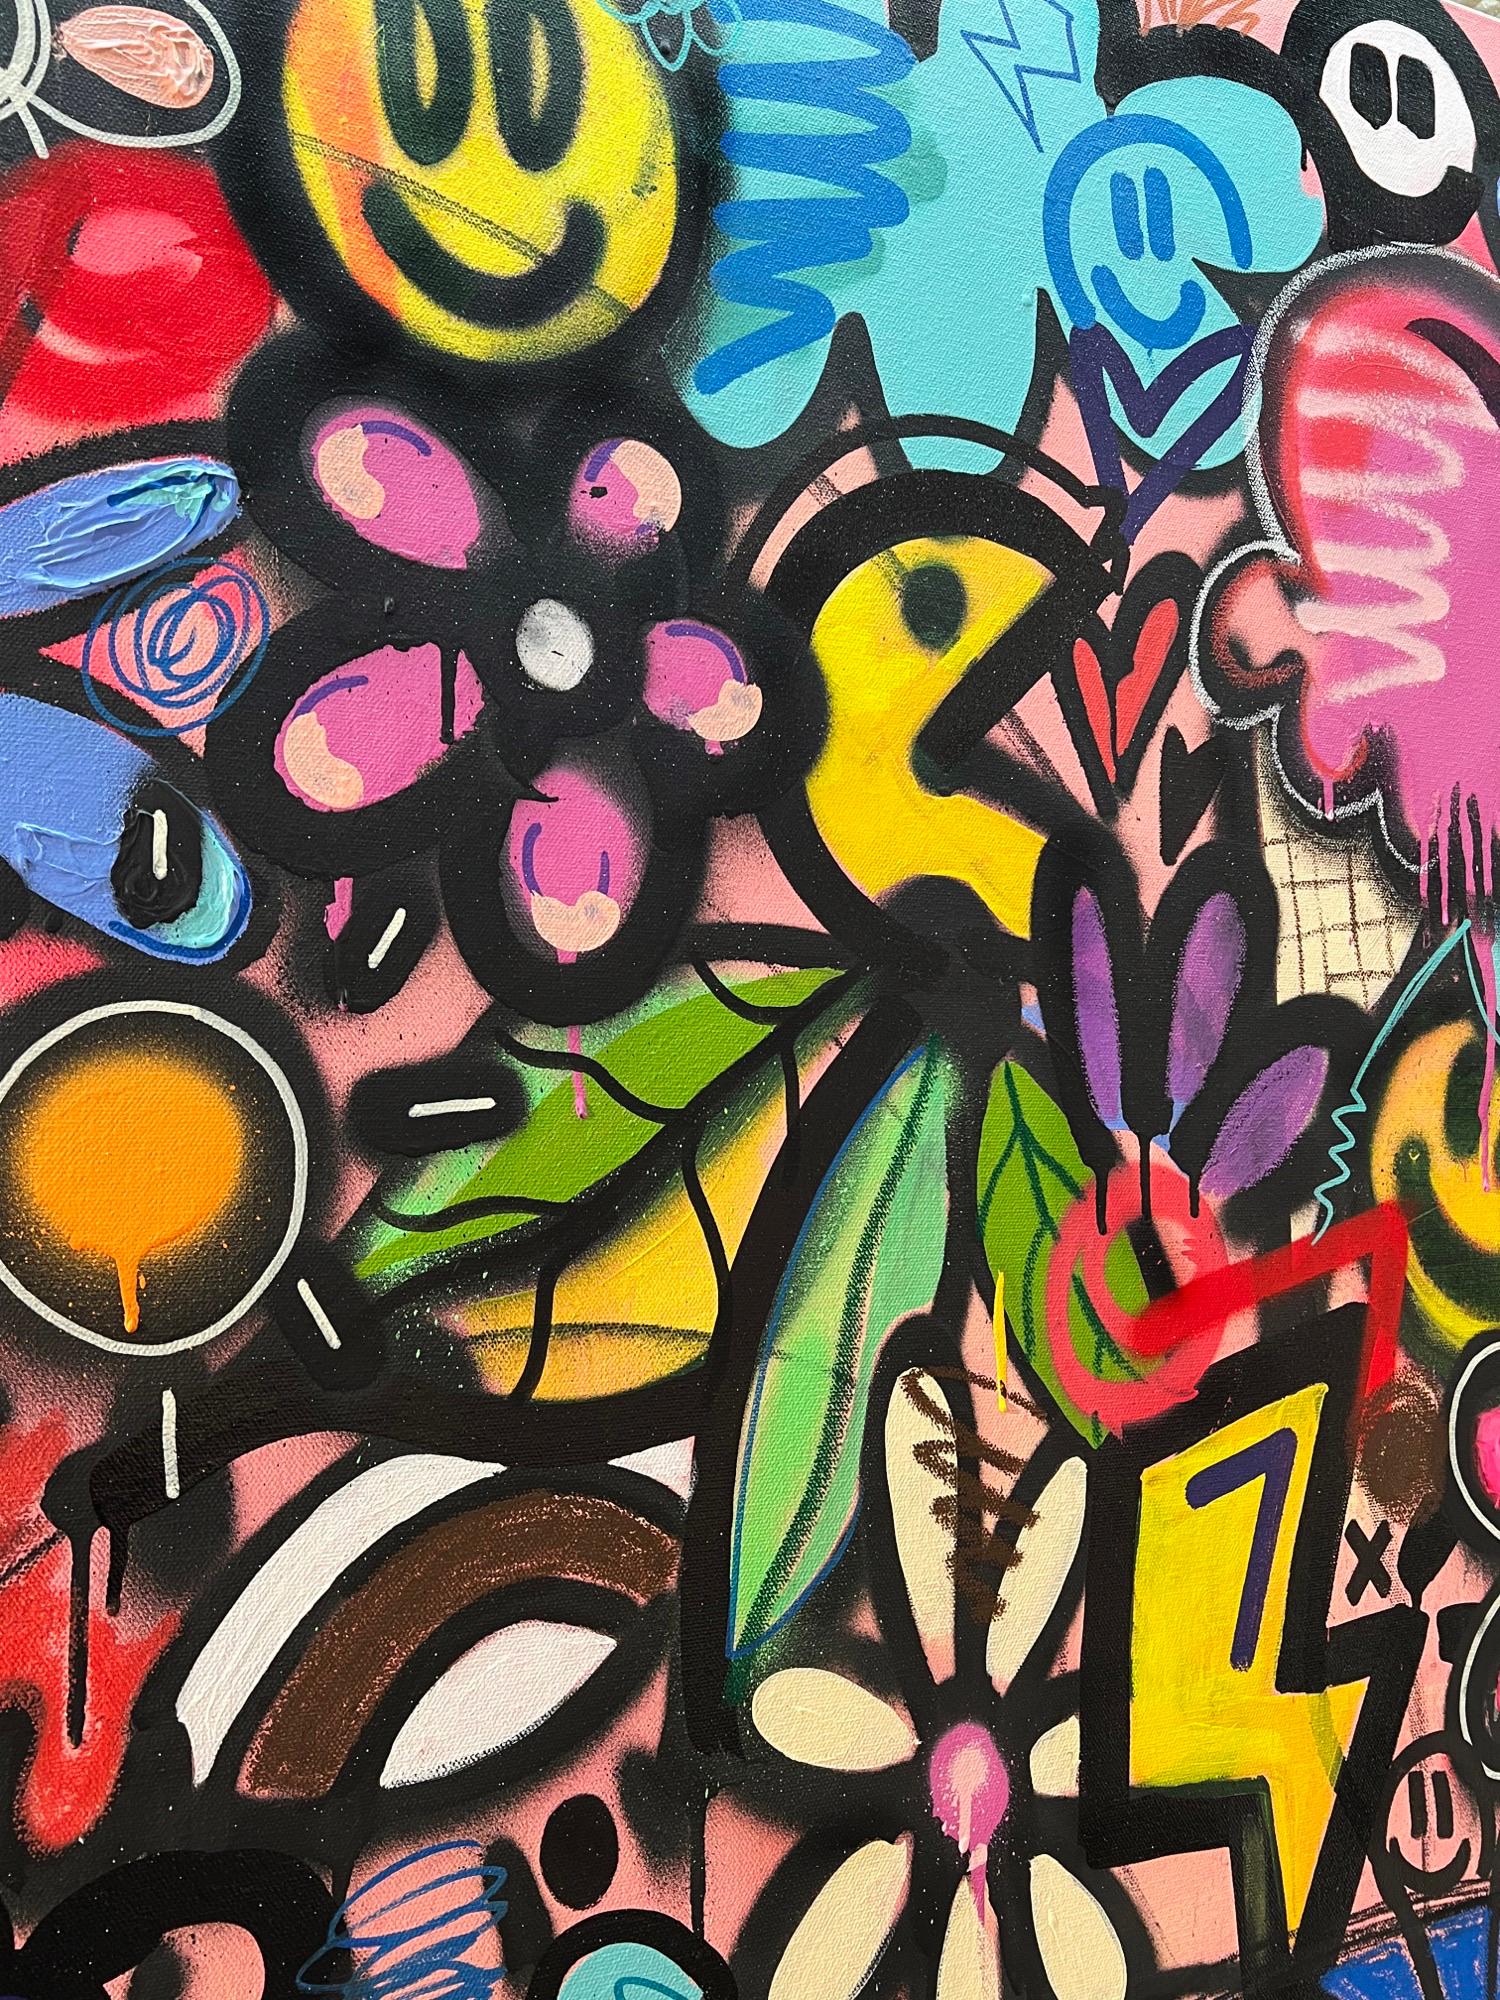 Bouquet No. 1, large graffiti floral still life, acrylic on canvas, 2022 - Painting by Chris Solcz